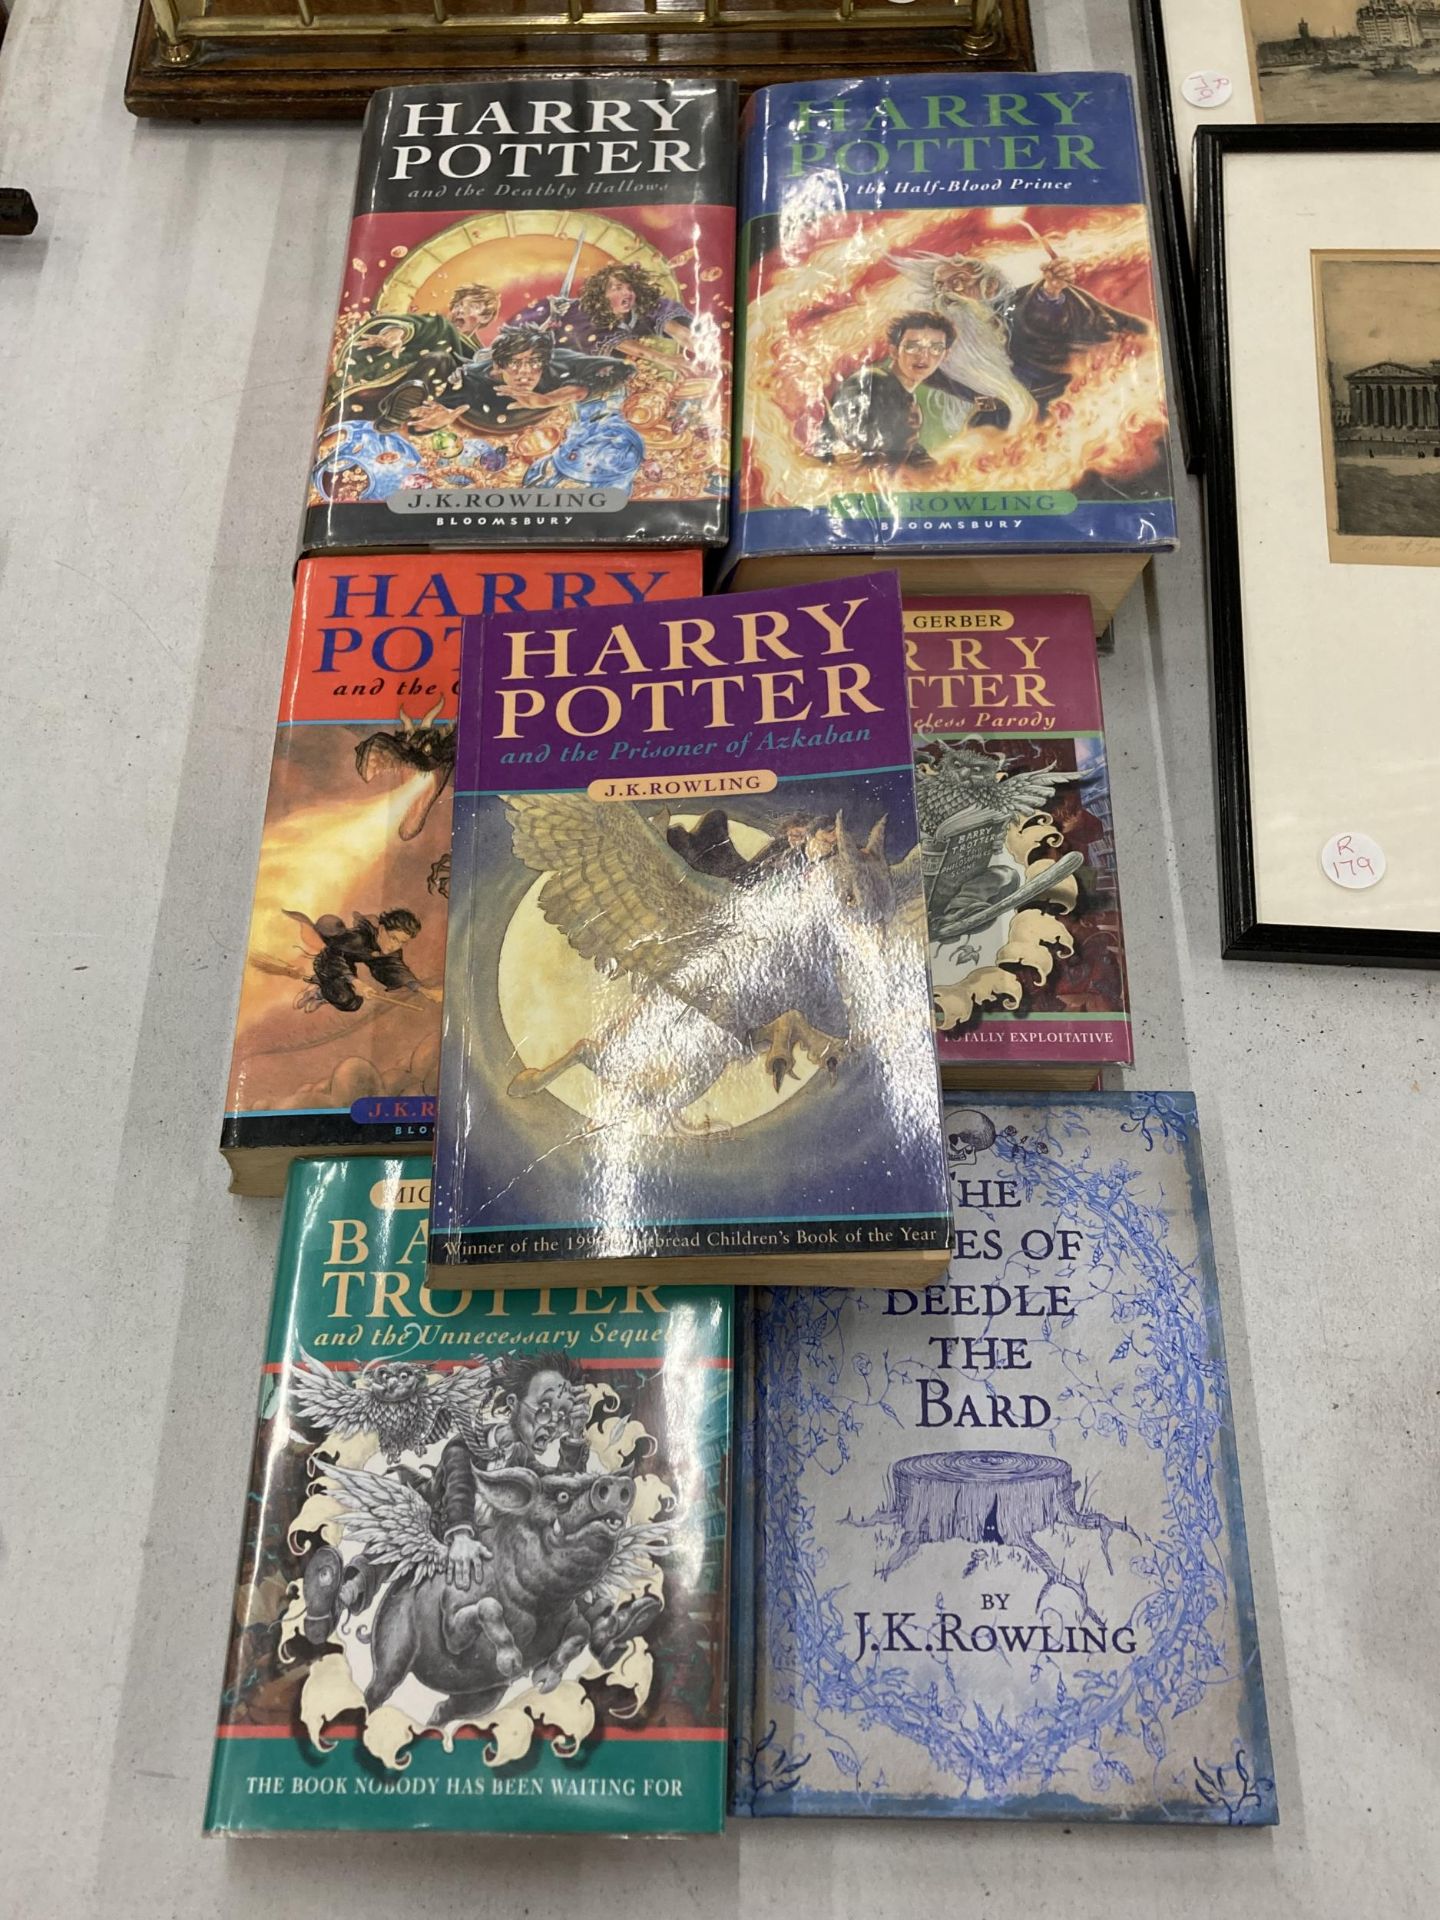 FOUR J K ROWLING HARRY POTTER BOOKS AND THE TALE OF BEEDLE THE BARD PLUS TWO BARRY POTTER BOOKS